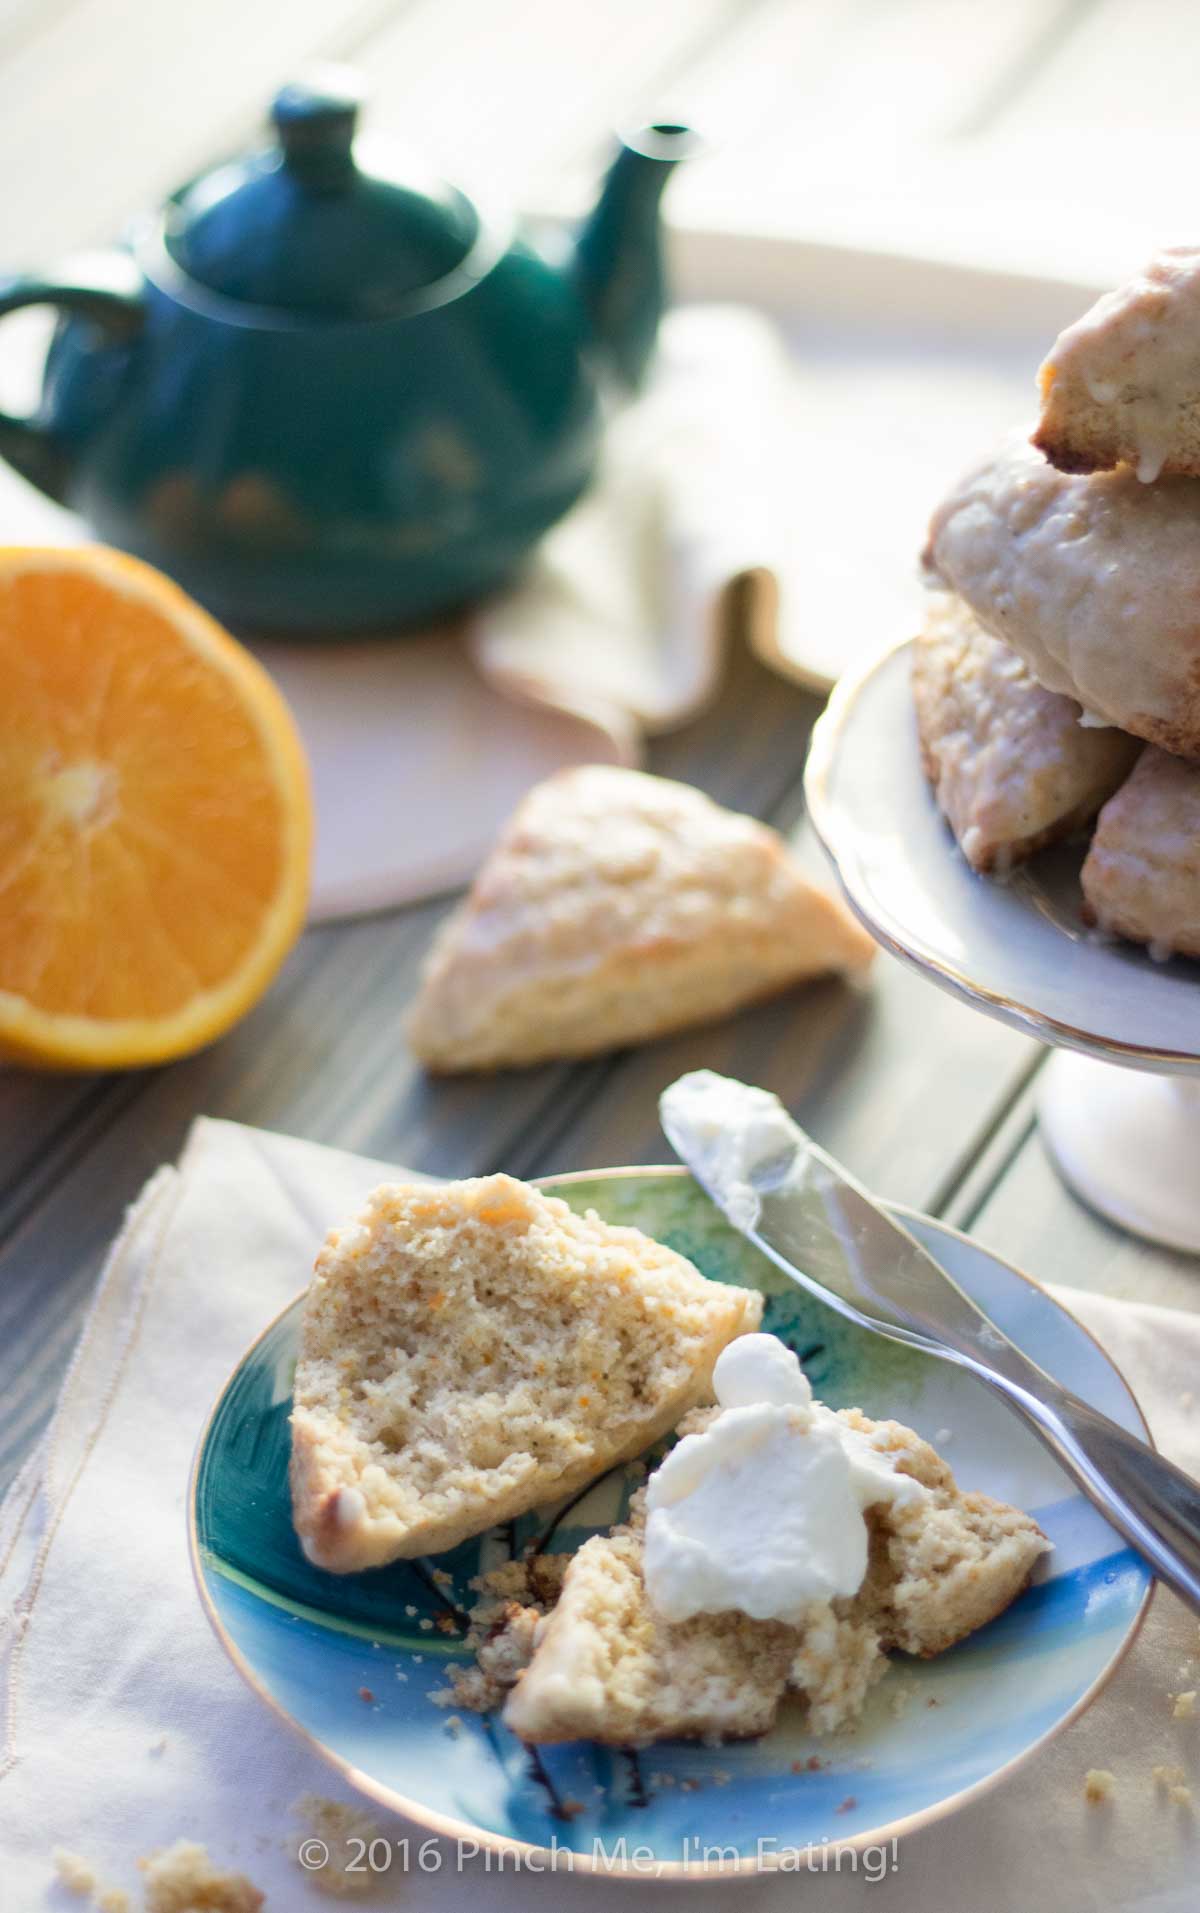 These fragrant cardamom orange scones have a delicate, fresh flavor and just the right crumbly-moist texture — the perfect treat for a bad-weather day.